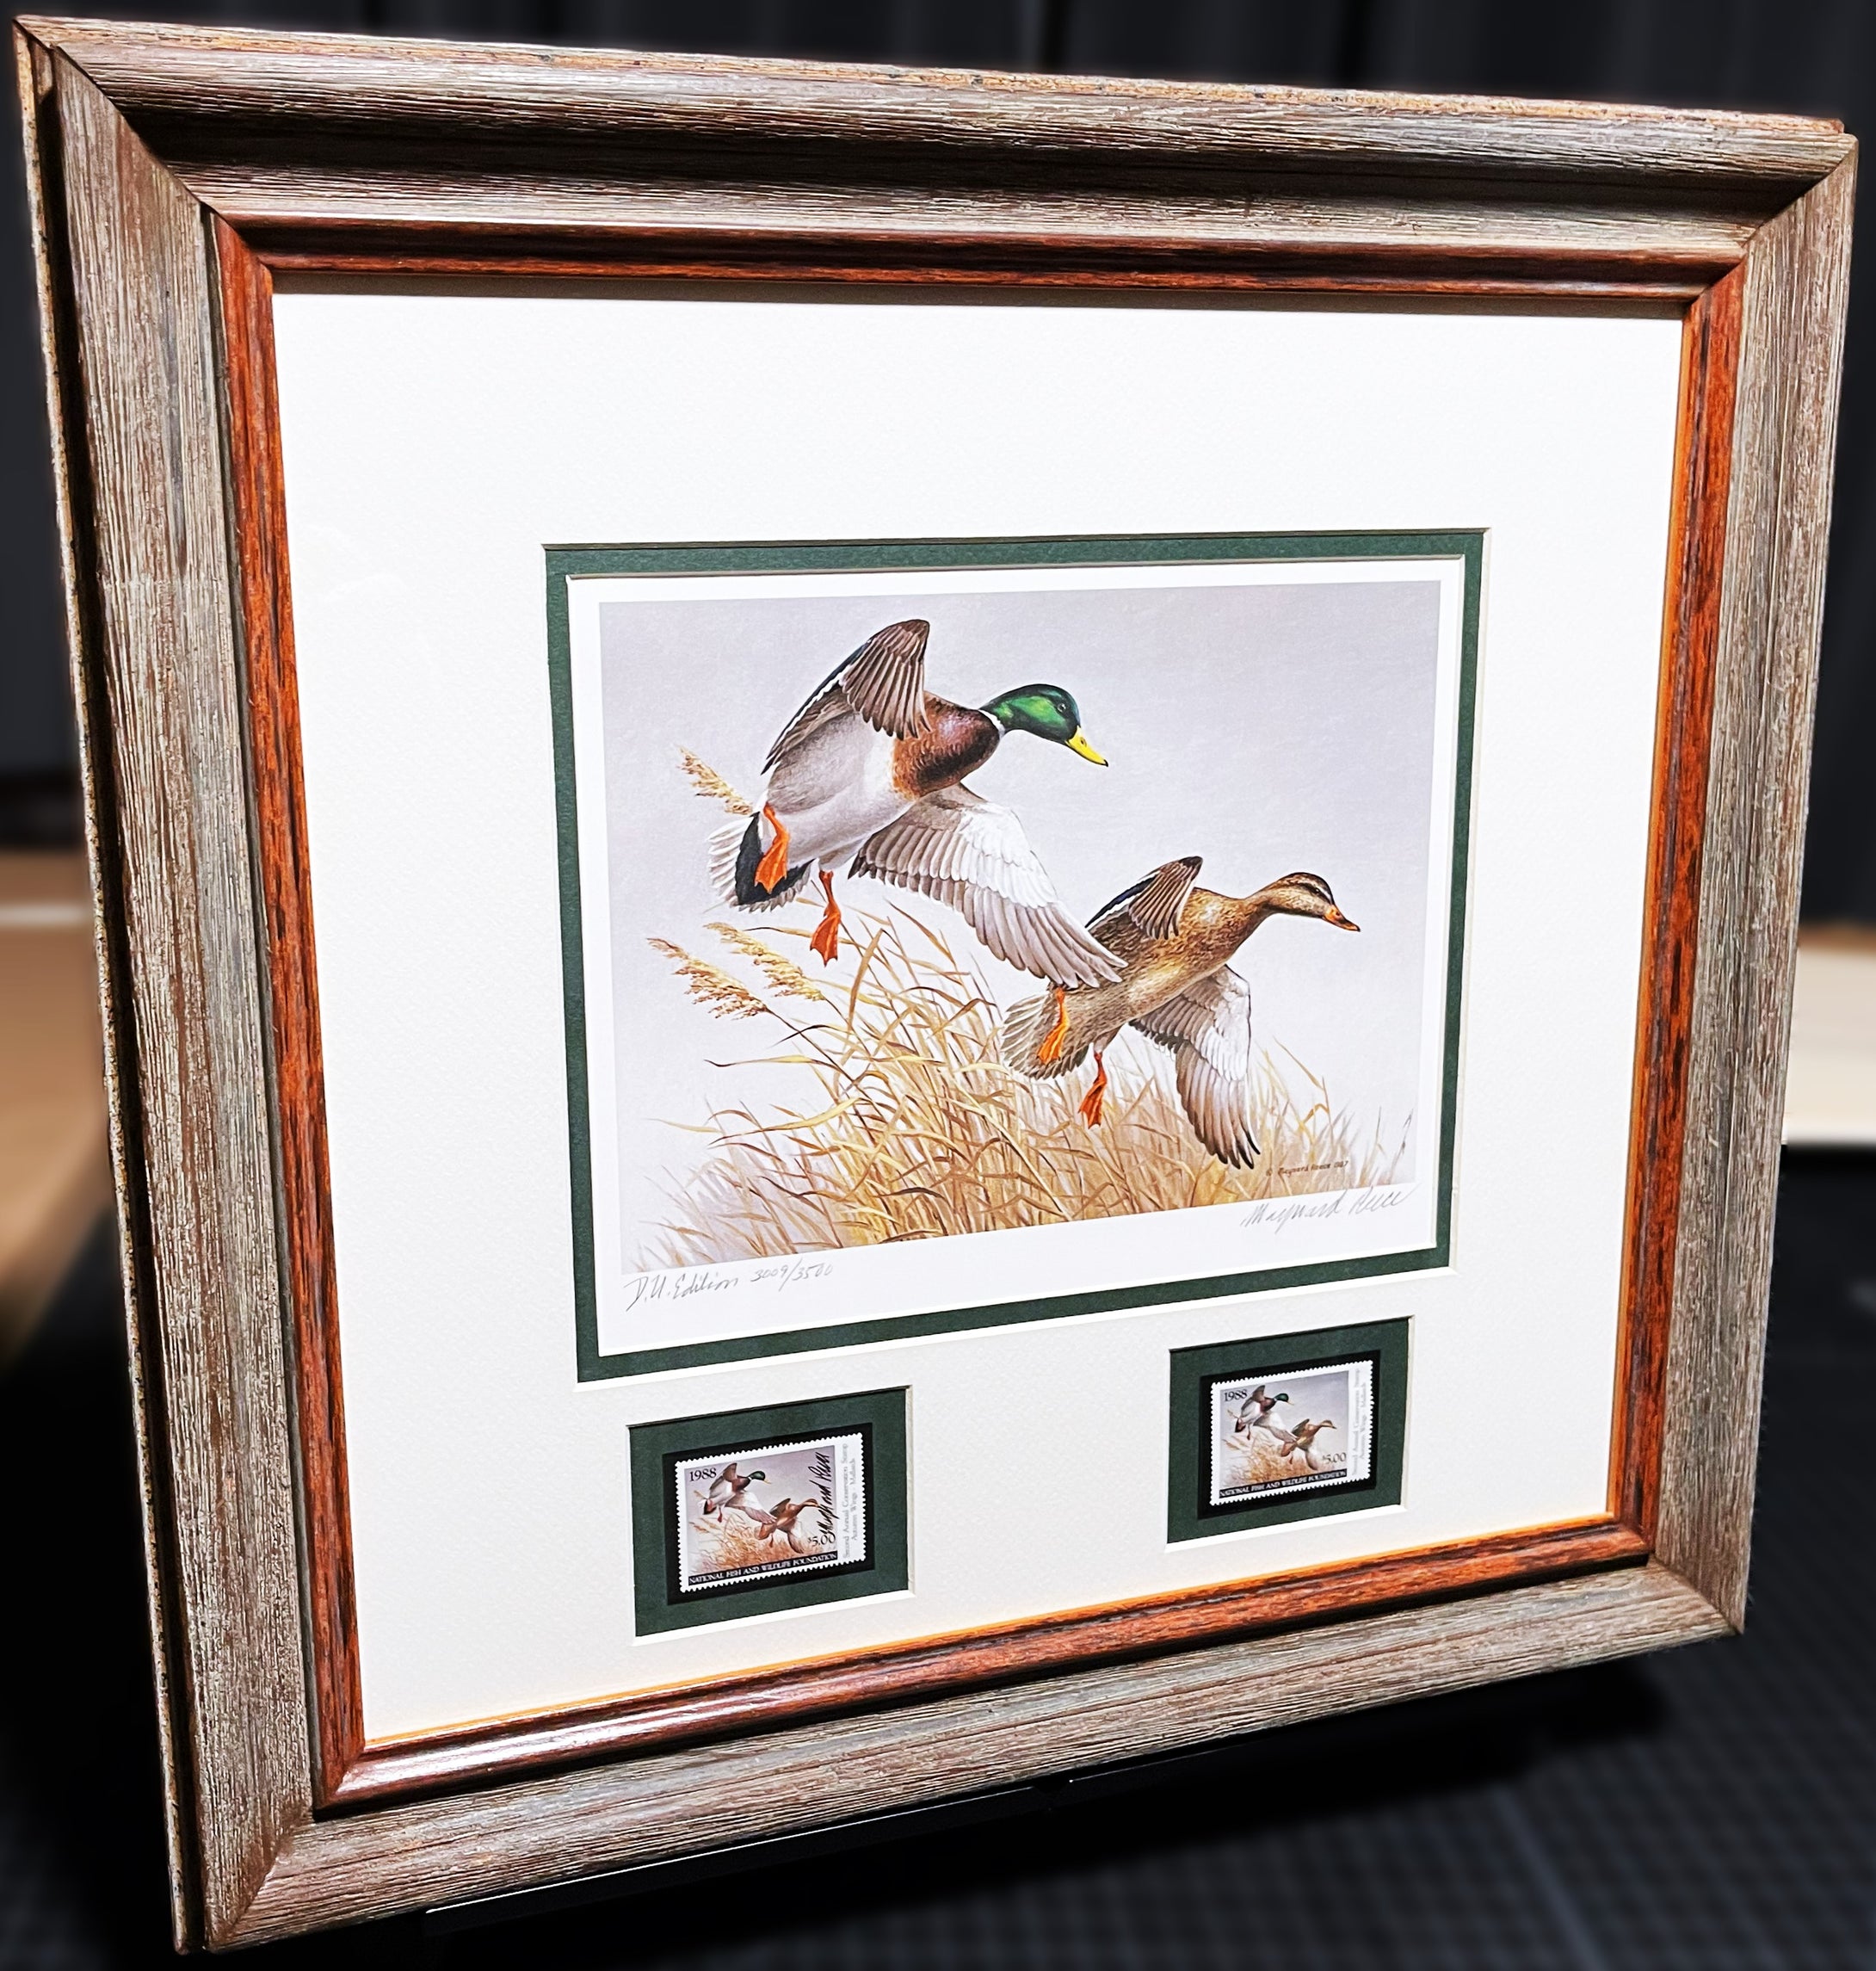 Maynard Reece  1988 National Fish And Wildlife Foundation Ducks Unlimited Edition Stamp Print With Double Stamps